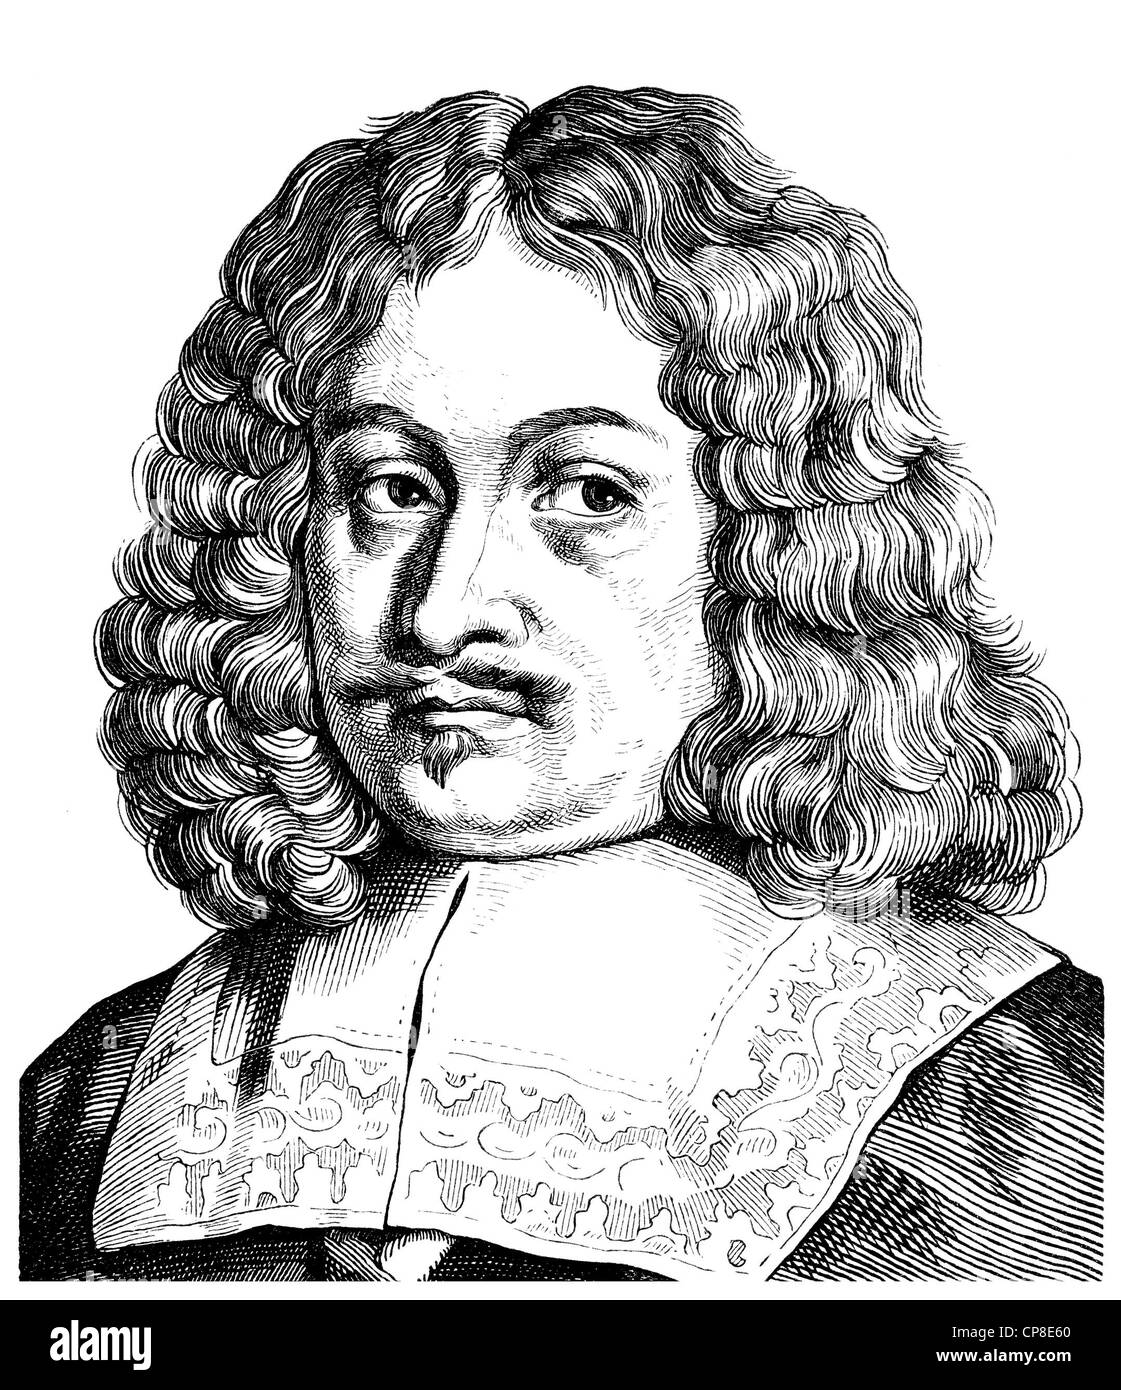 Andreas Gryphius or Greif, 1616 - 1664, a German poet and dramatist of the Baroque, writer of sonnets, 17th century, Historische Stock Photo